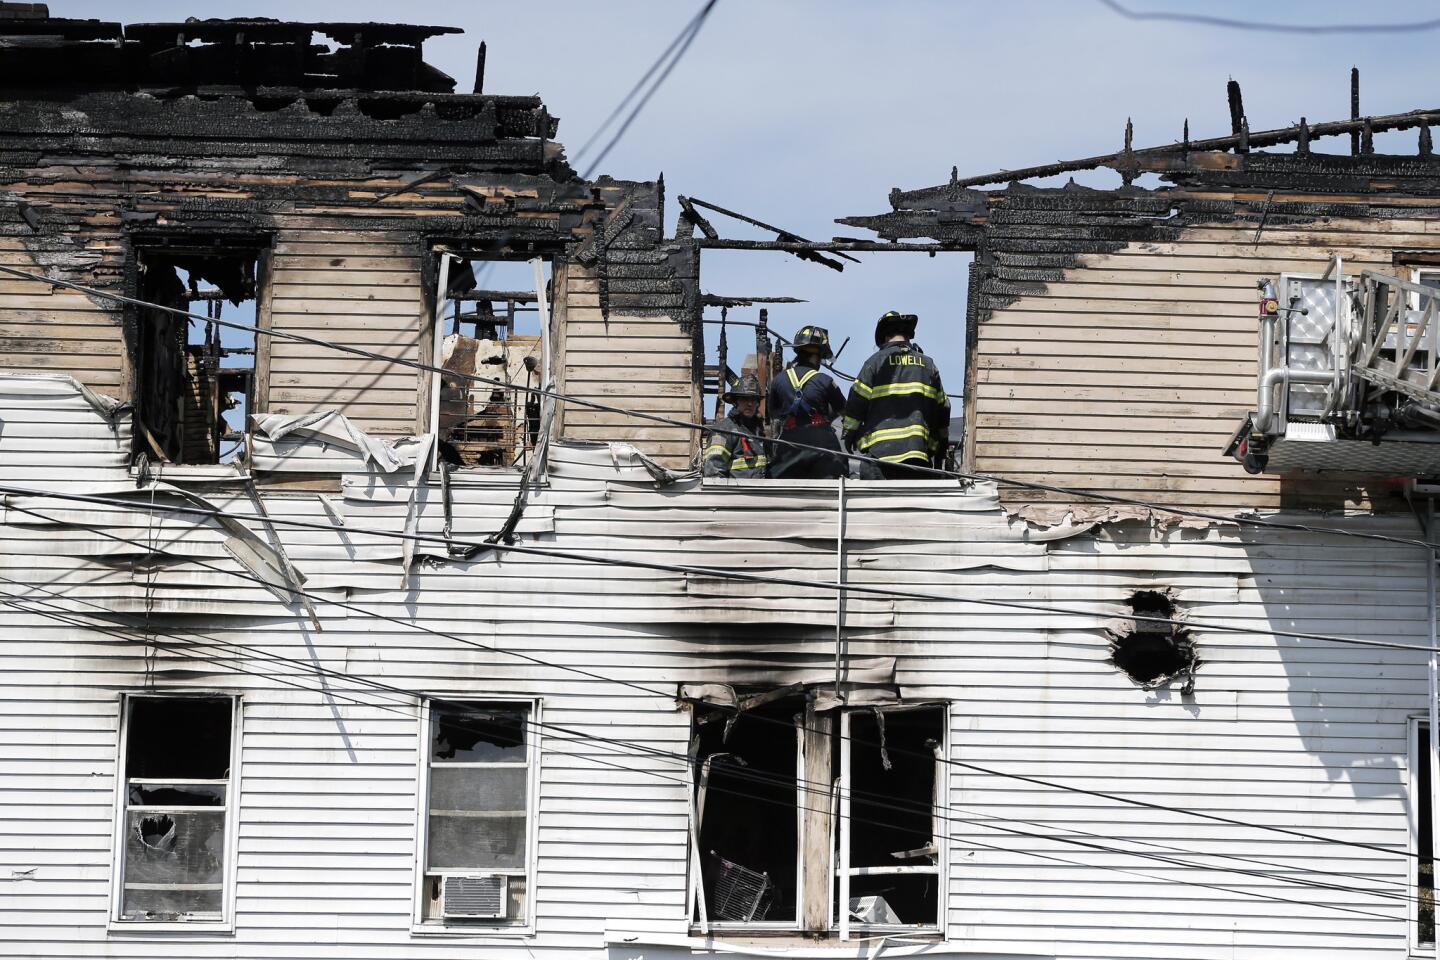 Firefighters work on the top floor of a burned Lowell, Mass., apartment building where officials said seven people, including three children, died in a fast-moving blaze. The building did not have a sprinkler system, said State Fire Marshal Stephen Coan.